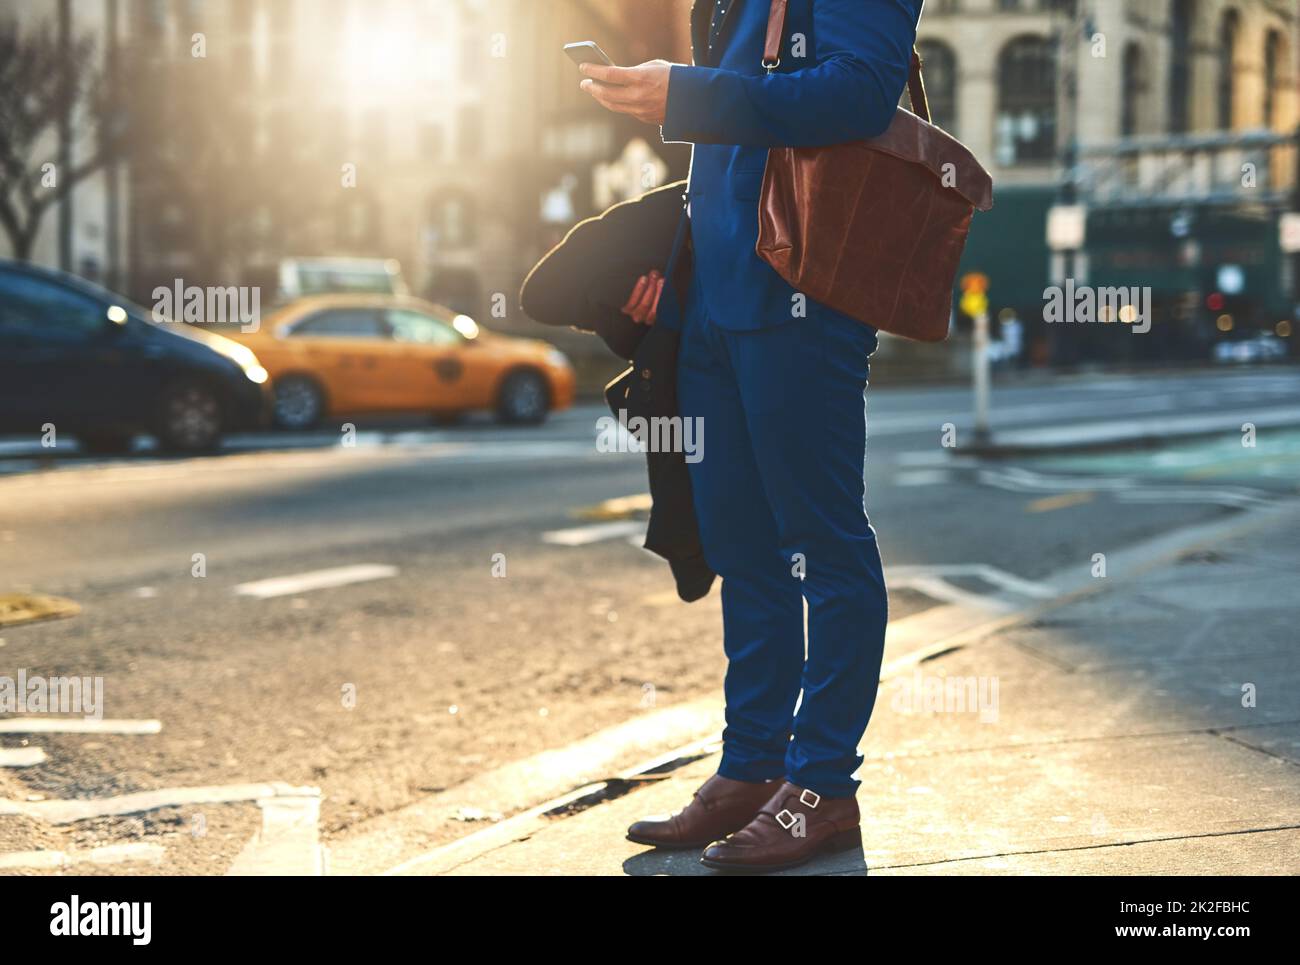 On the busy streets of the city. Low angle shot of a unrecognizable man texting on his phone while waiting for a taxi to take him to work in the morning. Stock Photo